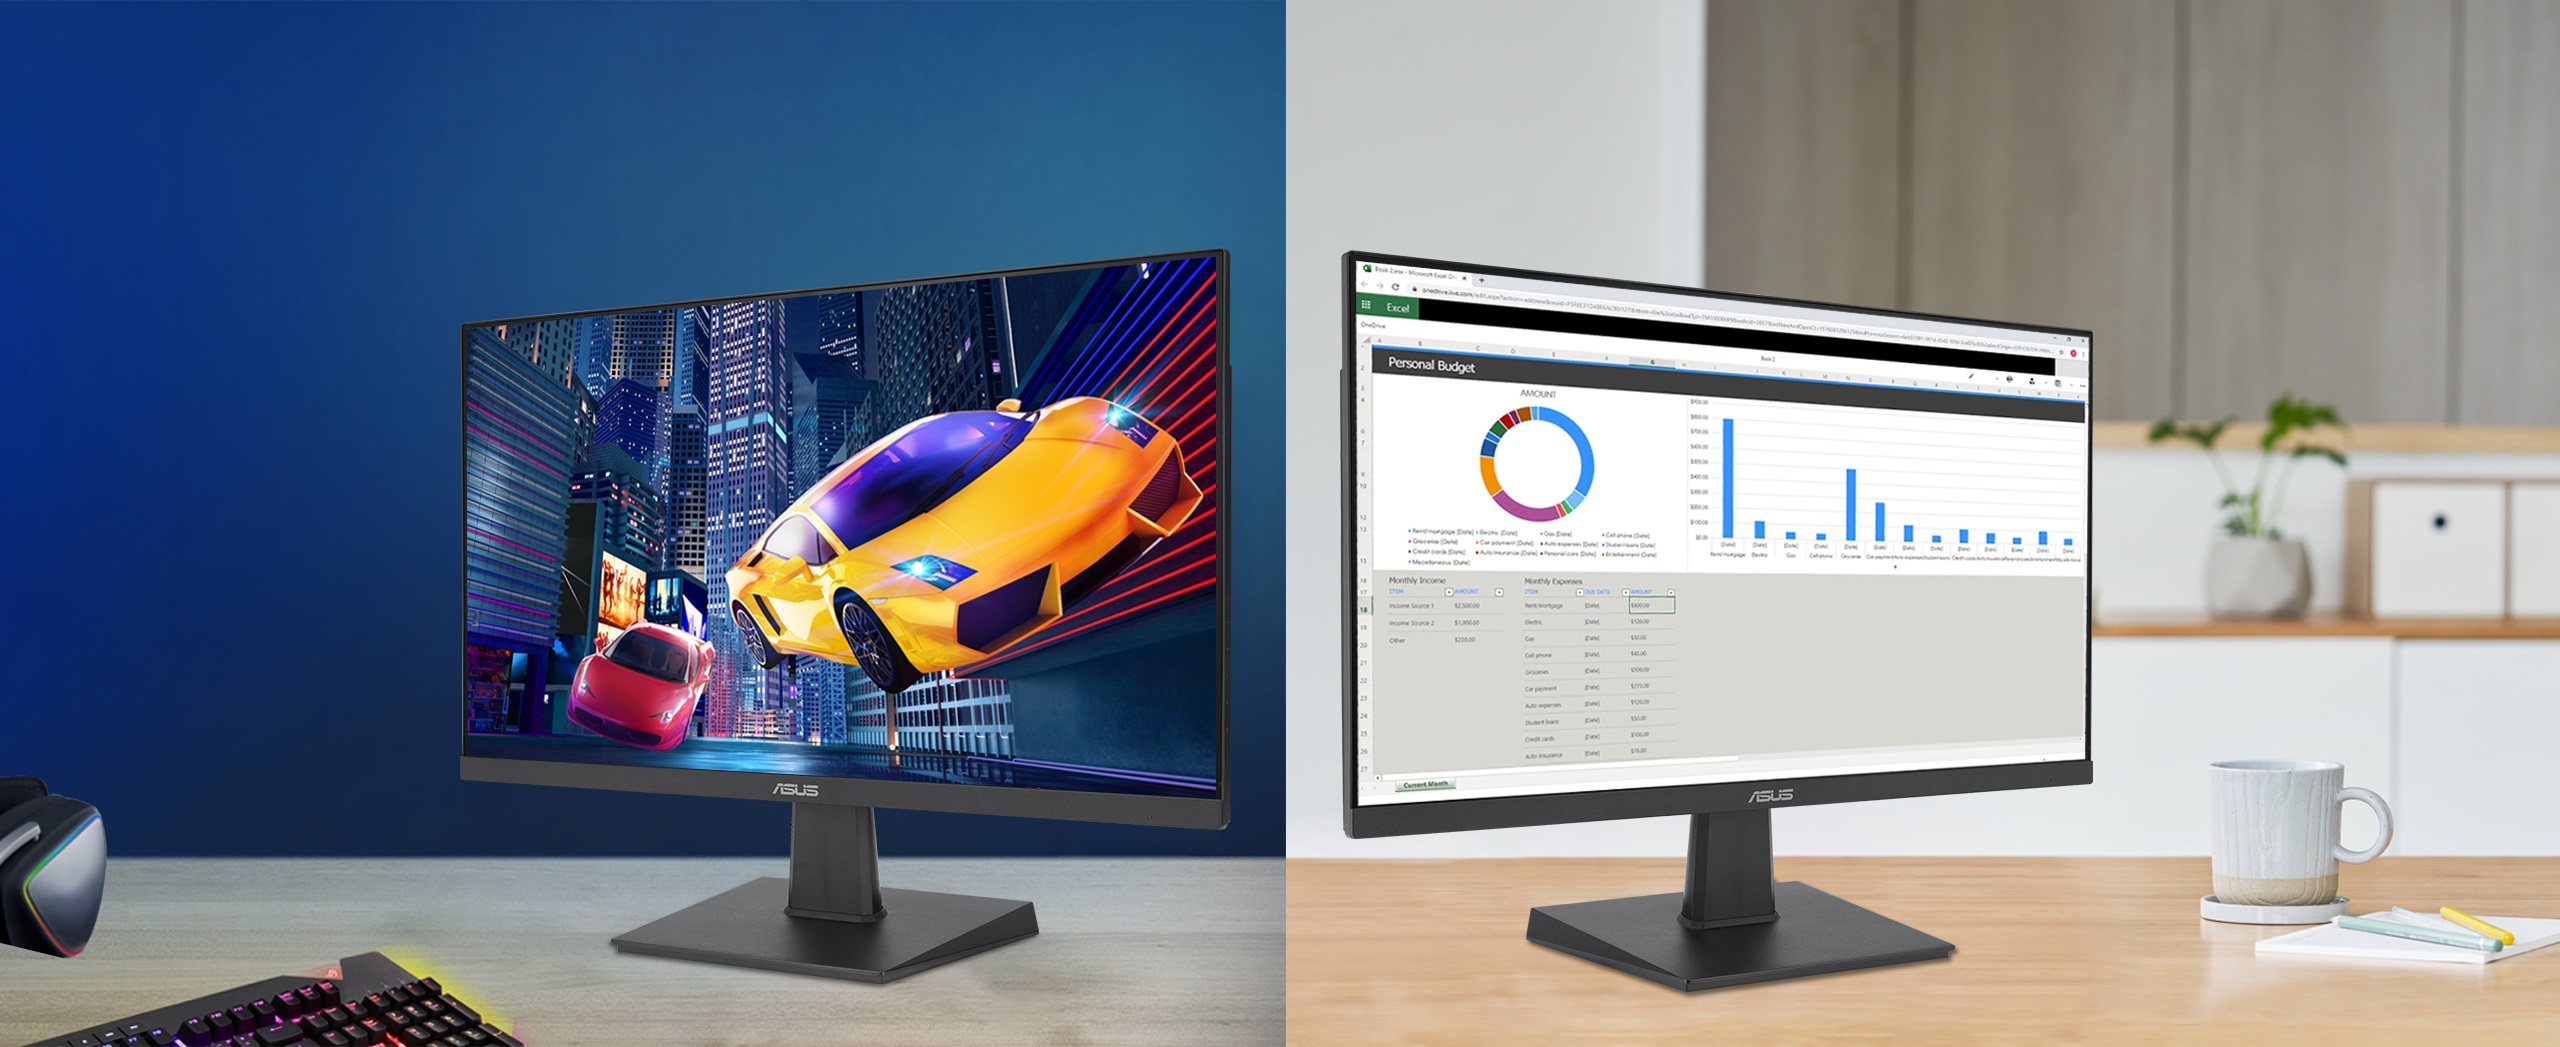 ASUS VA24EHFA is 23.8-inch IPS Eye Care Gaming monitor with fast 100Hz refresh rate and Adaptive-Sync technology to eliminate screen tearing and choppy frame rates for the smoother-than-ever experience.